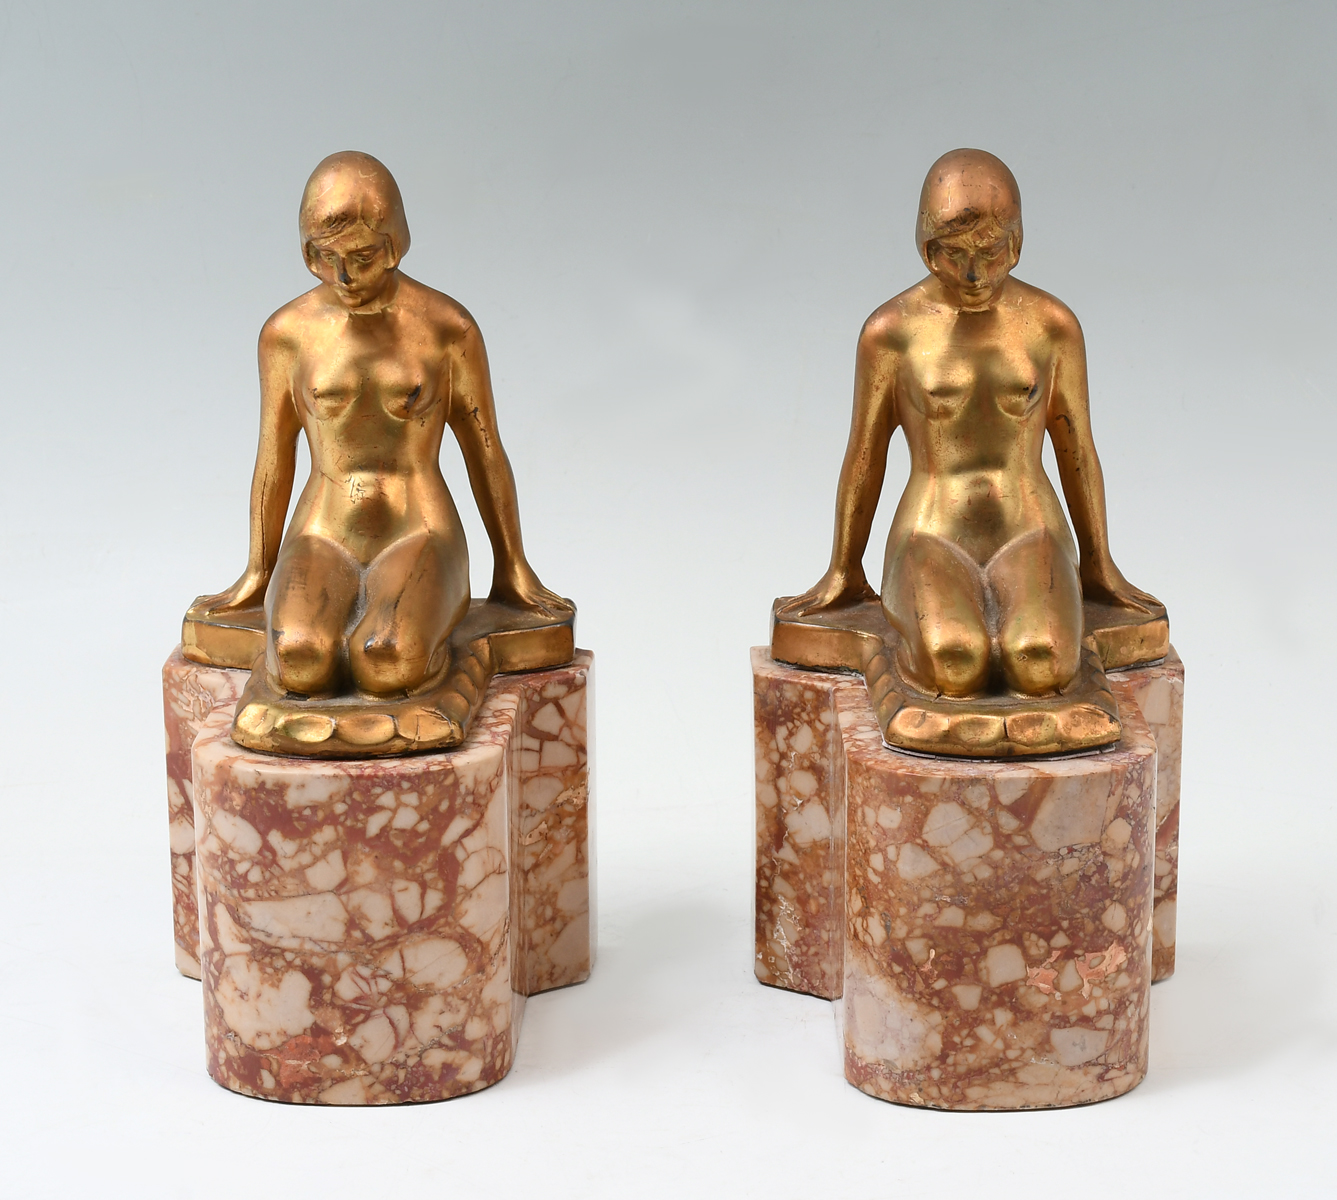 ART DECO NUDE BOOKENDS: Pair of